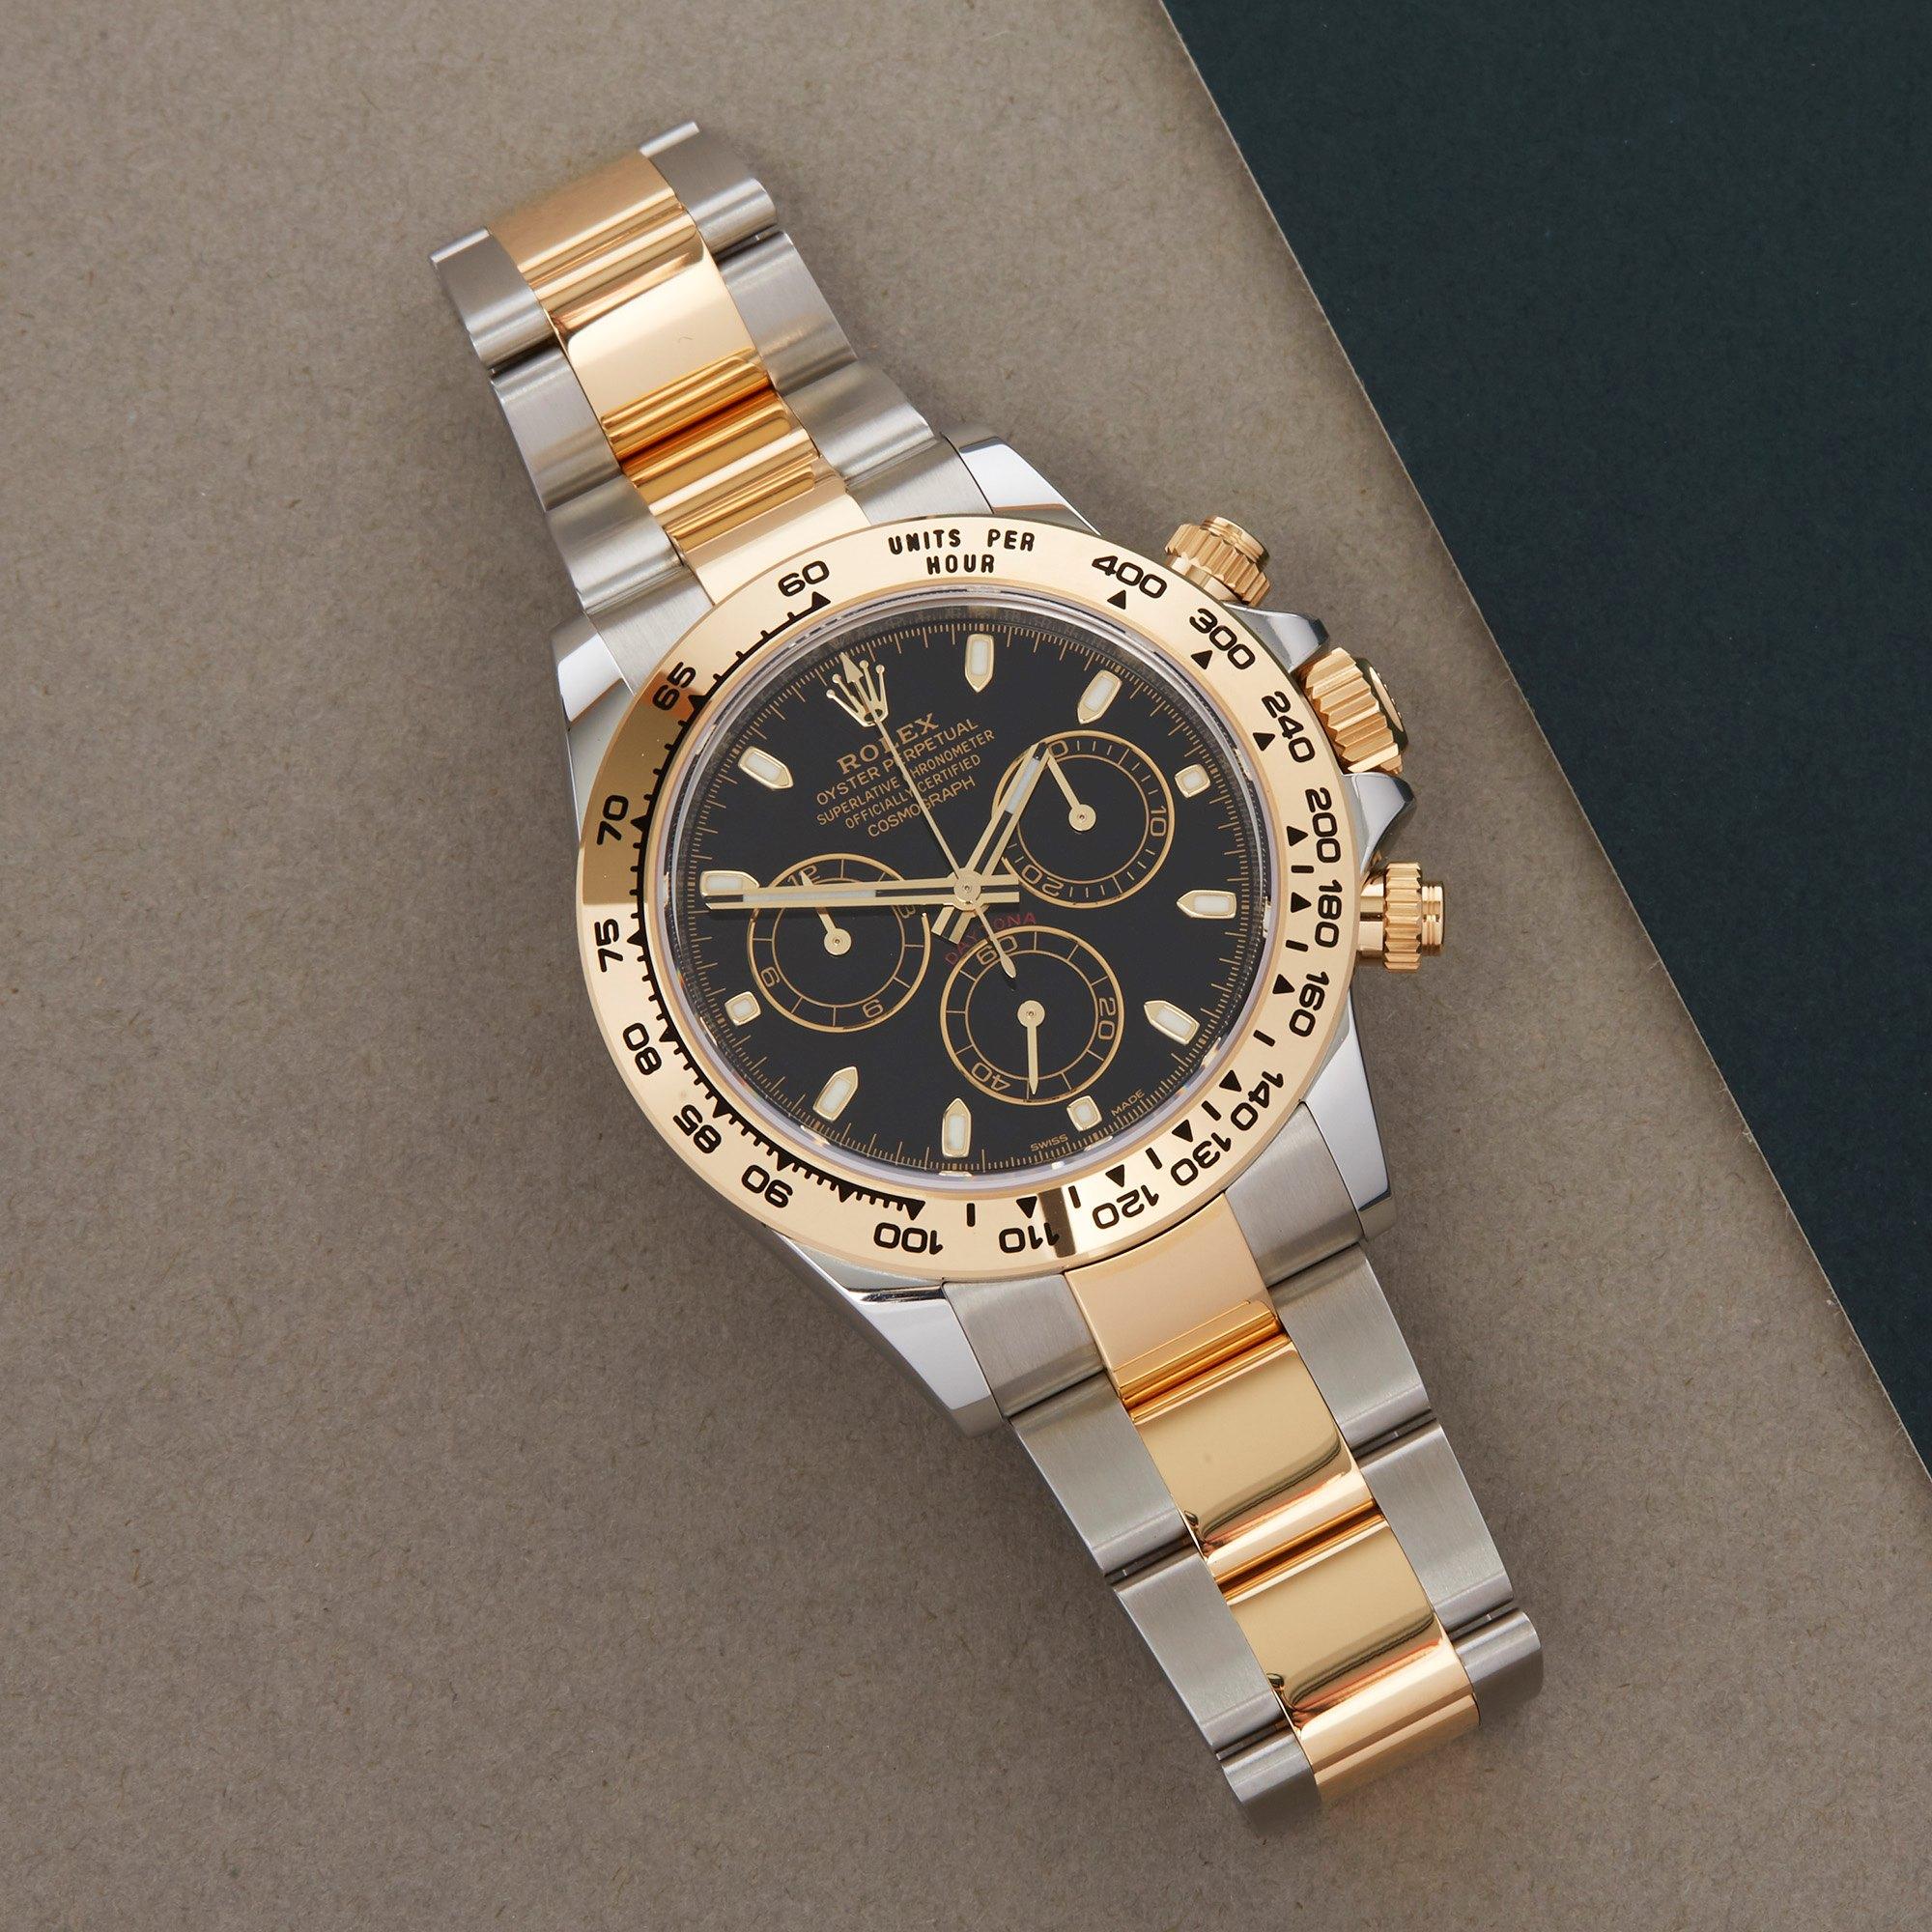 Xupes Reference: COM002660
Manufacturer: Rolex
Model: Daytona
Model Variant: 0
Model Number: 116503
Age: 44051
Gender: Men
Complete With: Rolex Box, Manuals, Card Holder, Swing Tag & Guarantee 
Dial: Black Baton 
Glass: Sapphire Crystal
Case